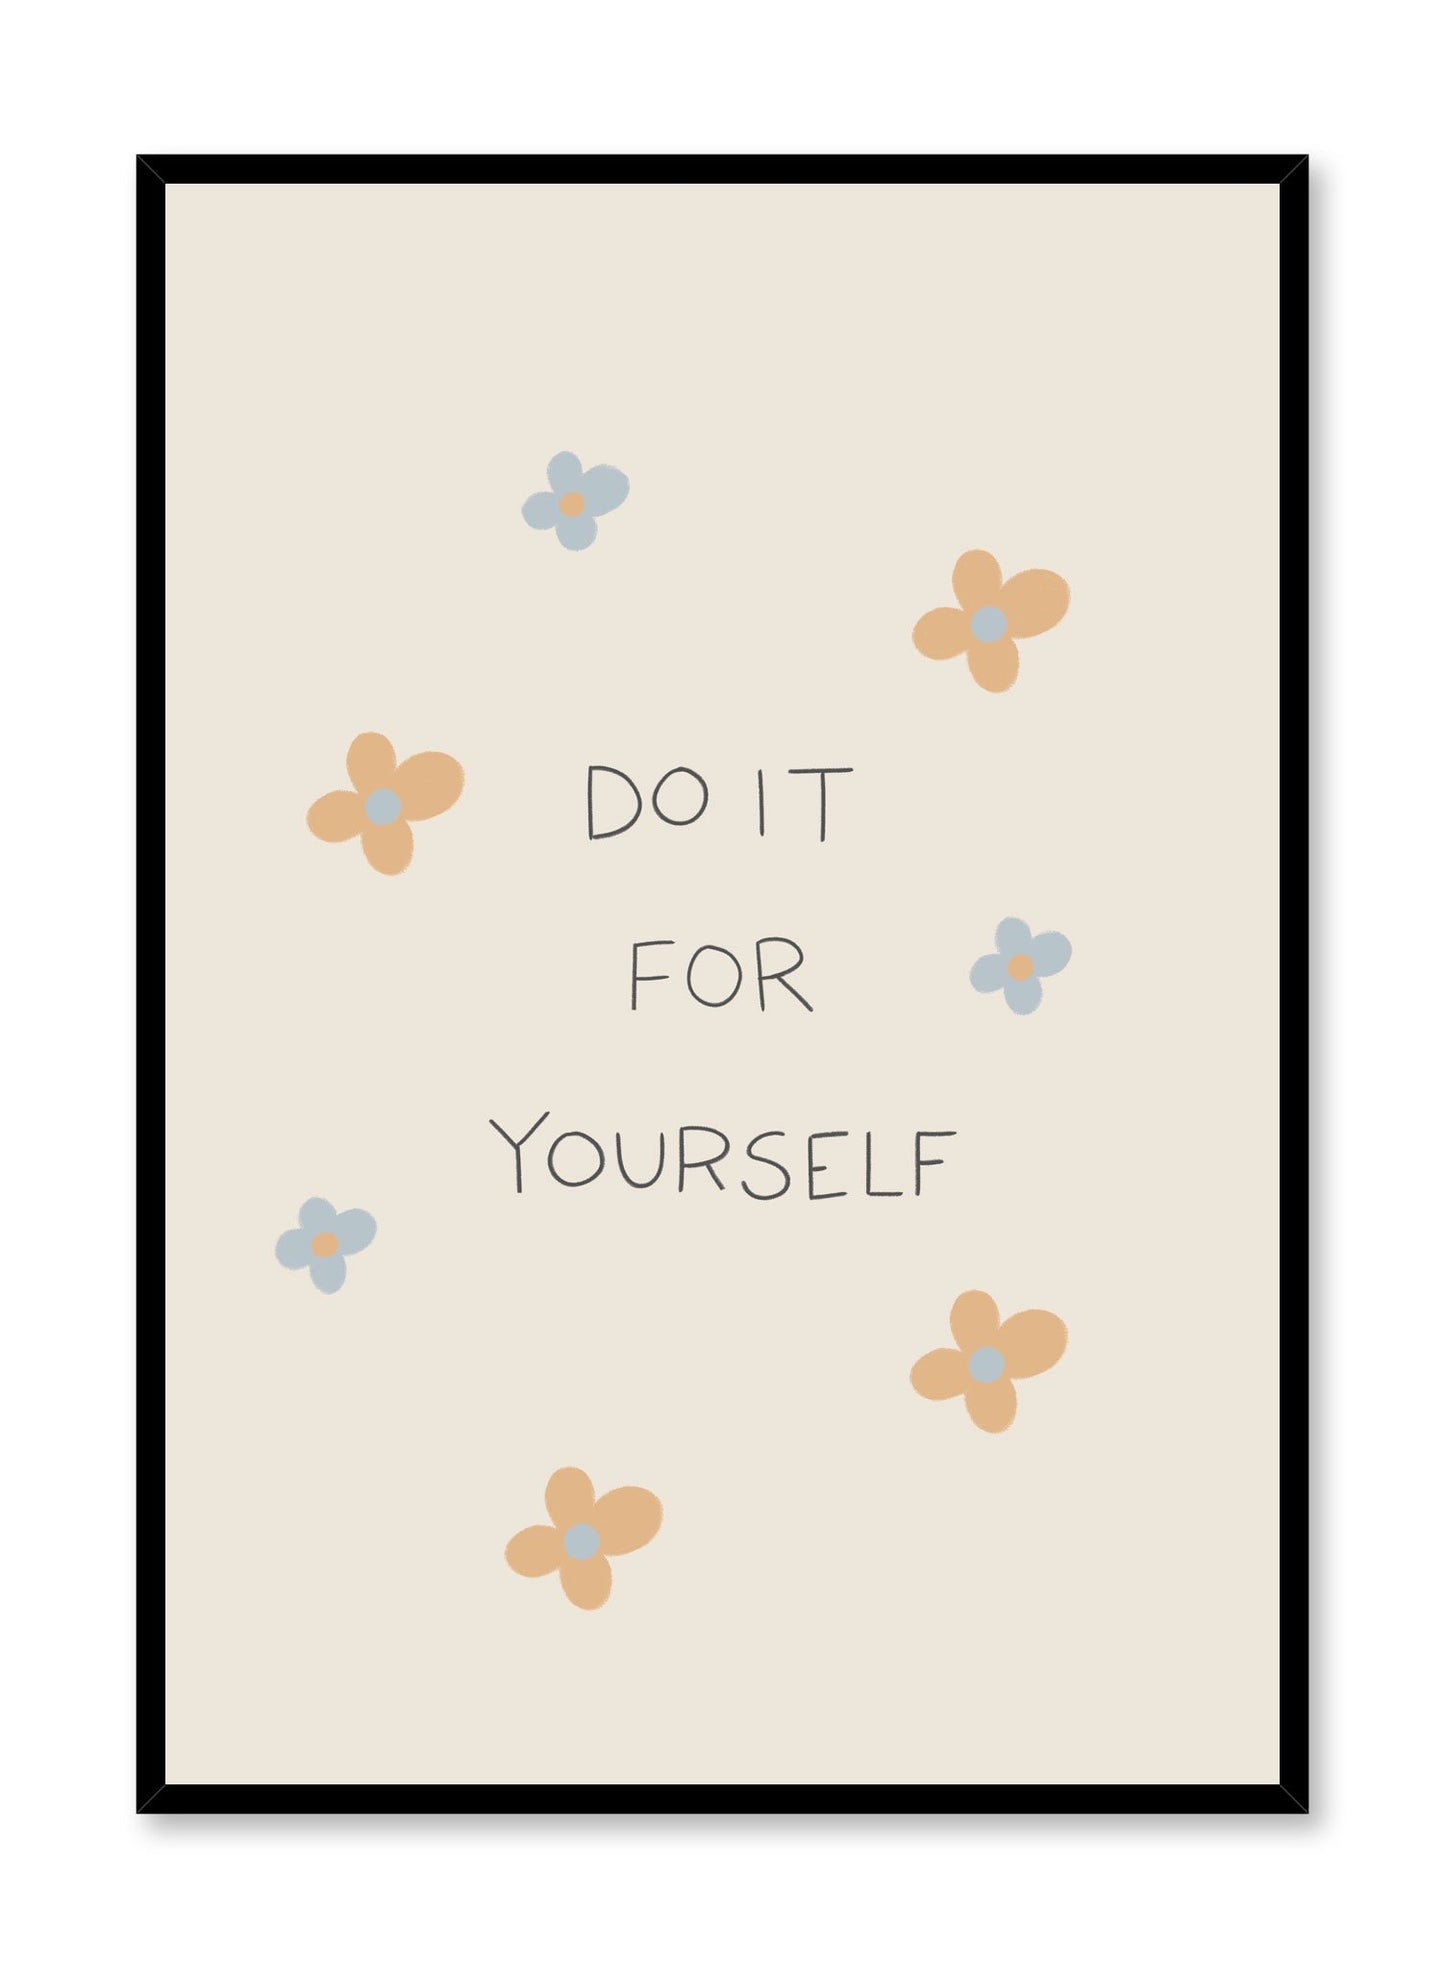 Do It For Yourself is a minimalist typography by Opposite Wall of the message "Do It For Yourself". 